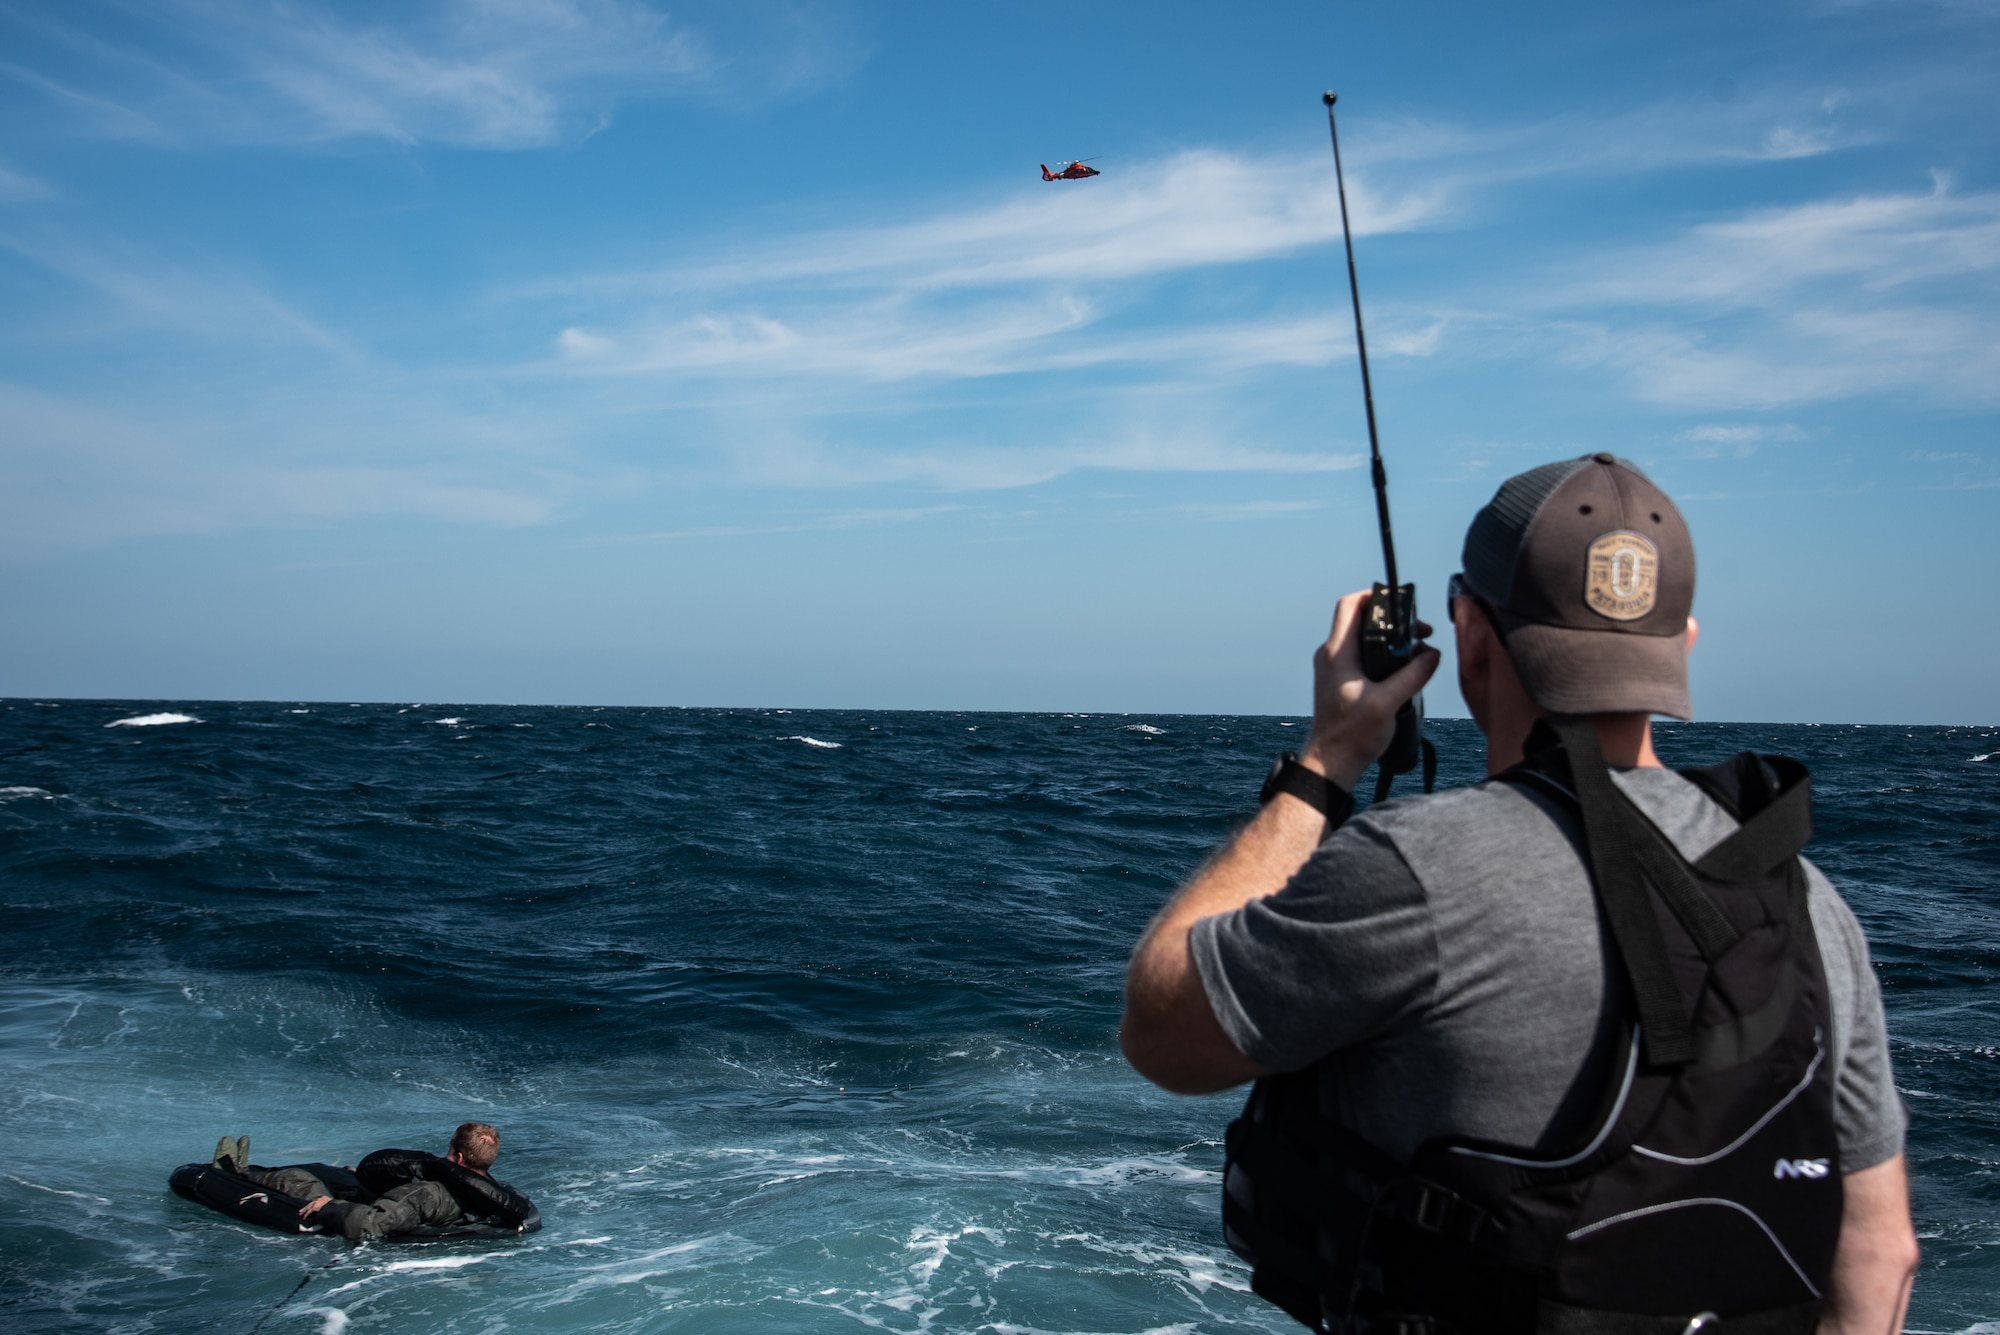 U.S. Air Force Tech. Sgt. David Jones, 20th Operations Support Squadron survival, evasion, resistance and escape noncommissioned officer in charge talks with a U.S. Coast Guard MH-65 Dolphin during a training exercise off the coast of Tybee Island Coast Guard Station, Georgia, June 21.